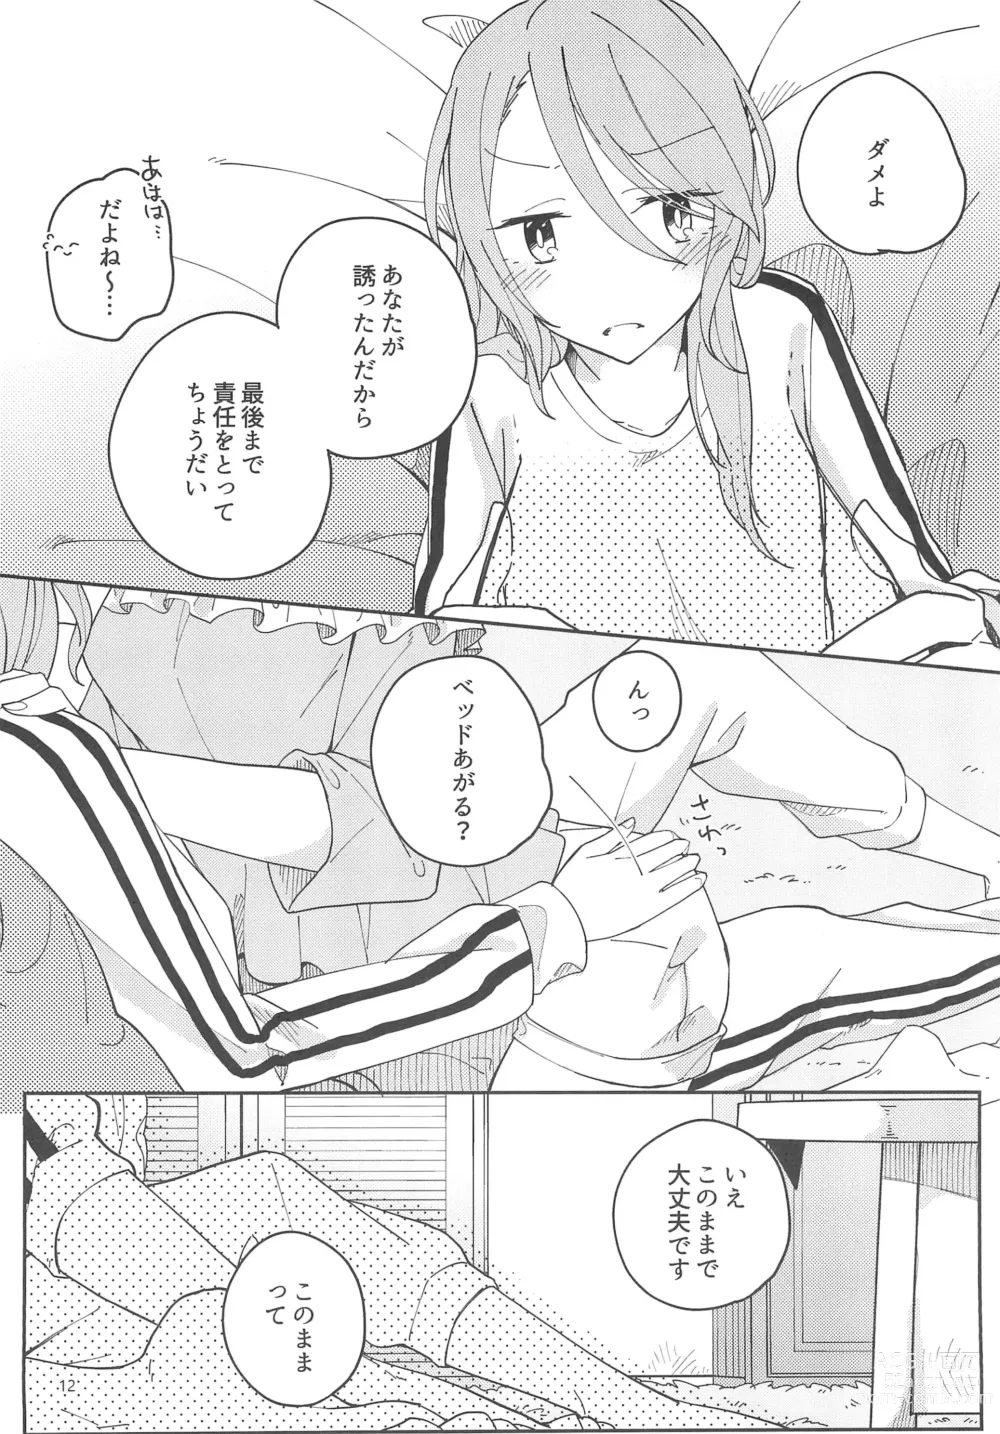 Page 14 of doujinshi I’m crazy about you.